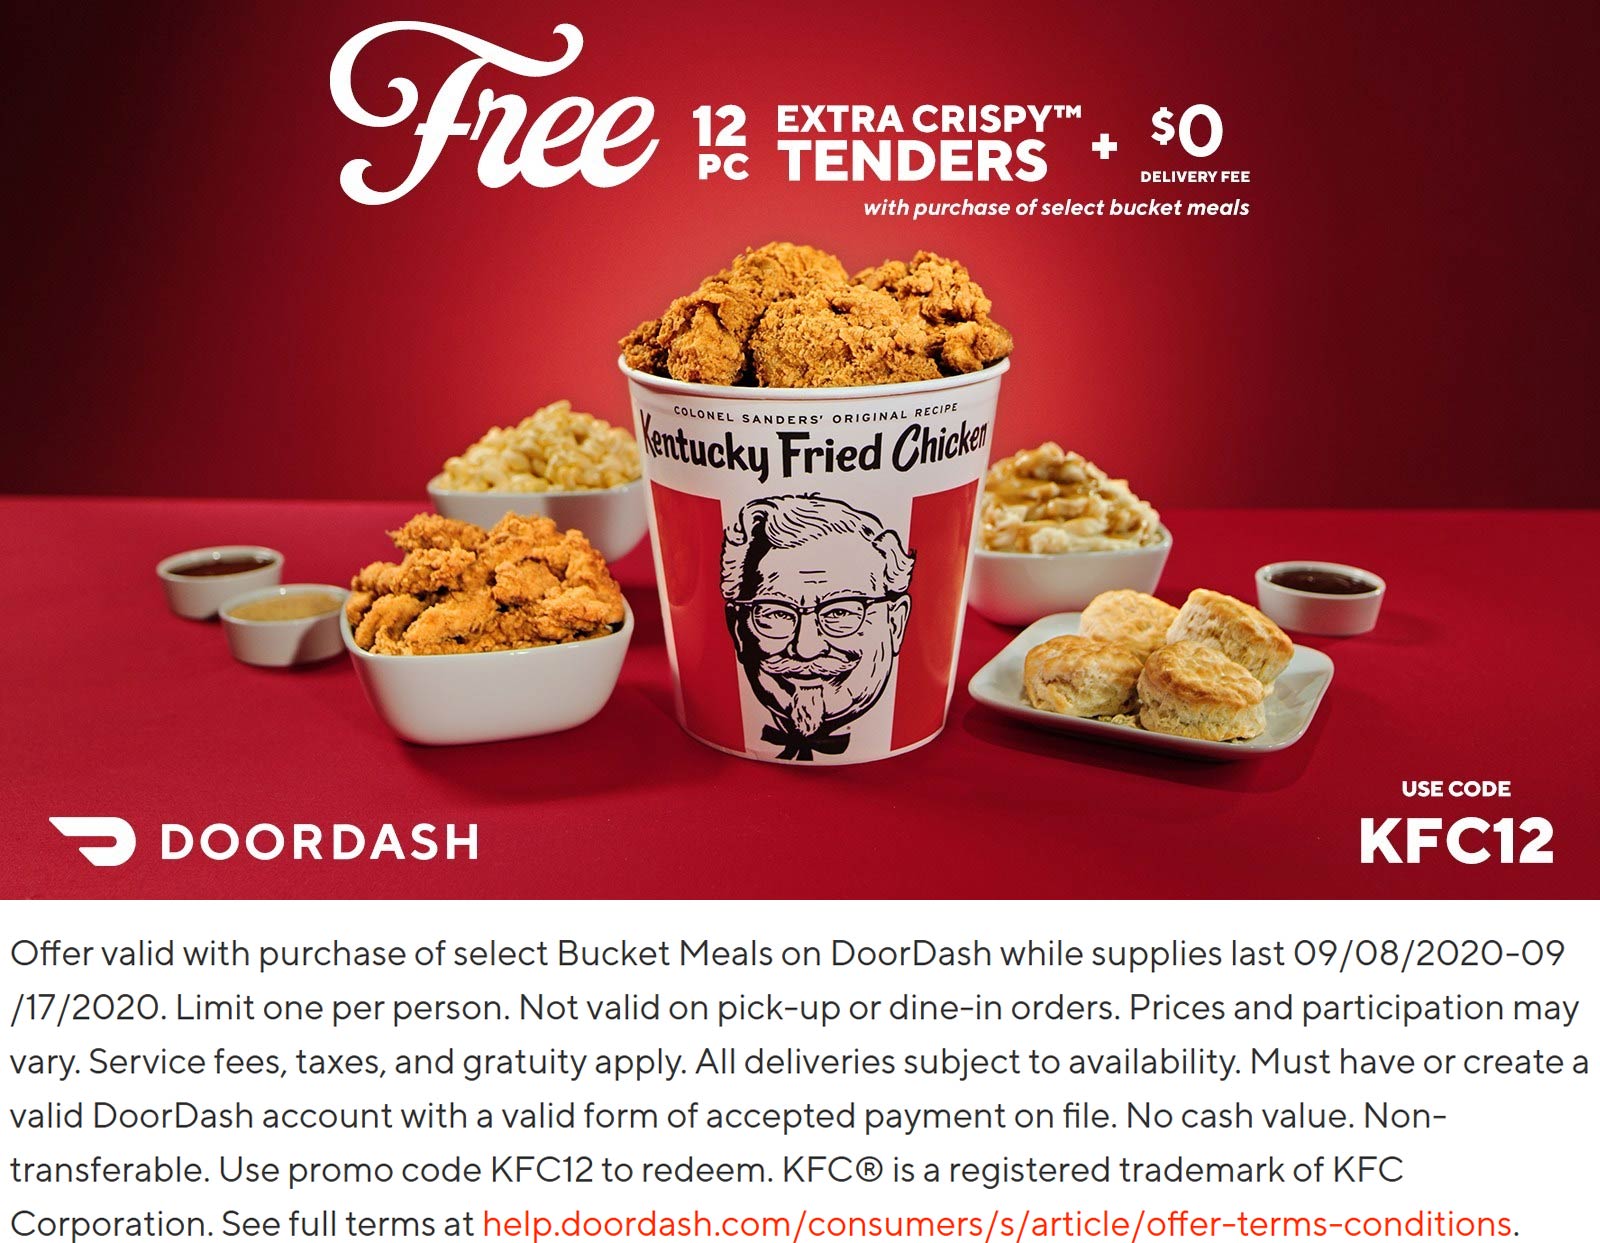 Free 12pc crispy chicken tenders with your bucket meal at KFC via free